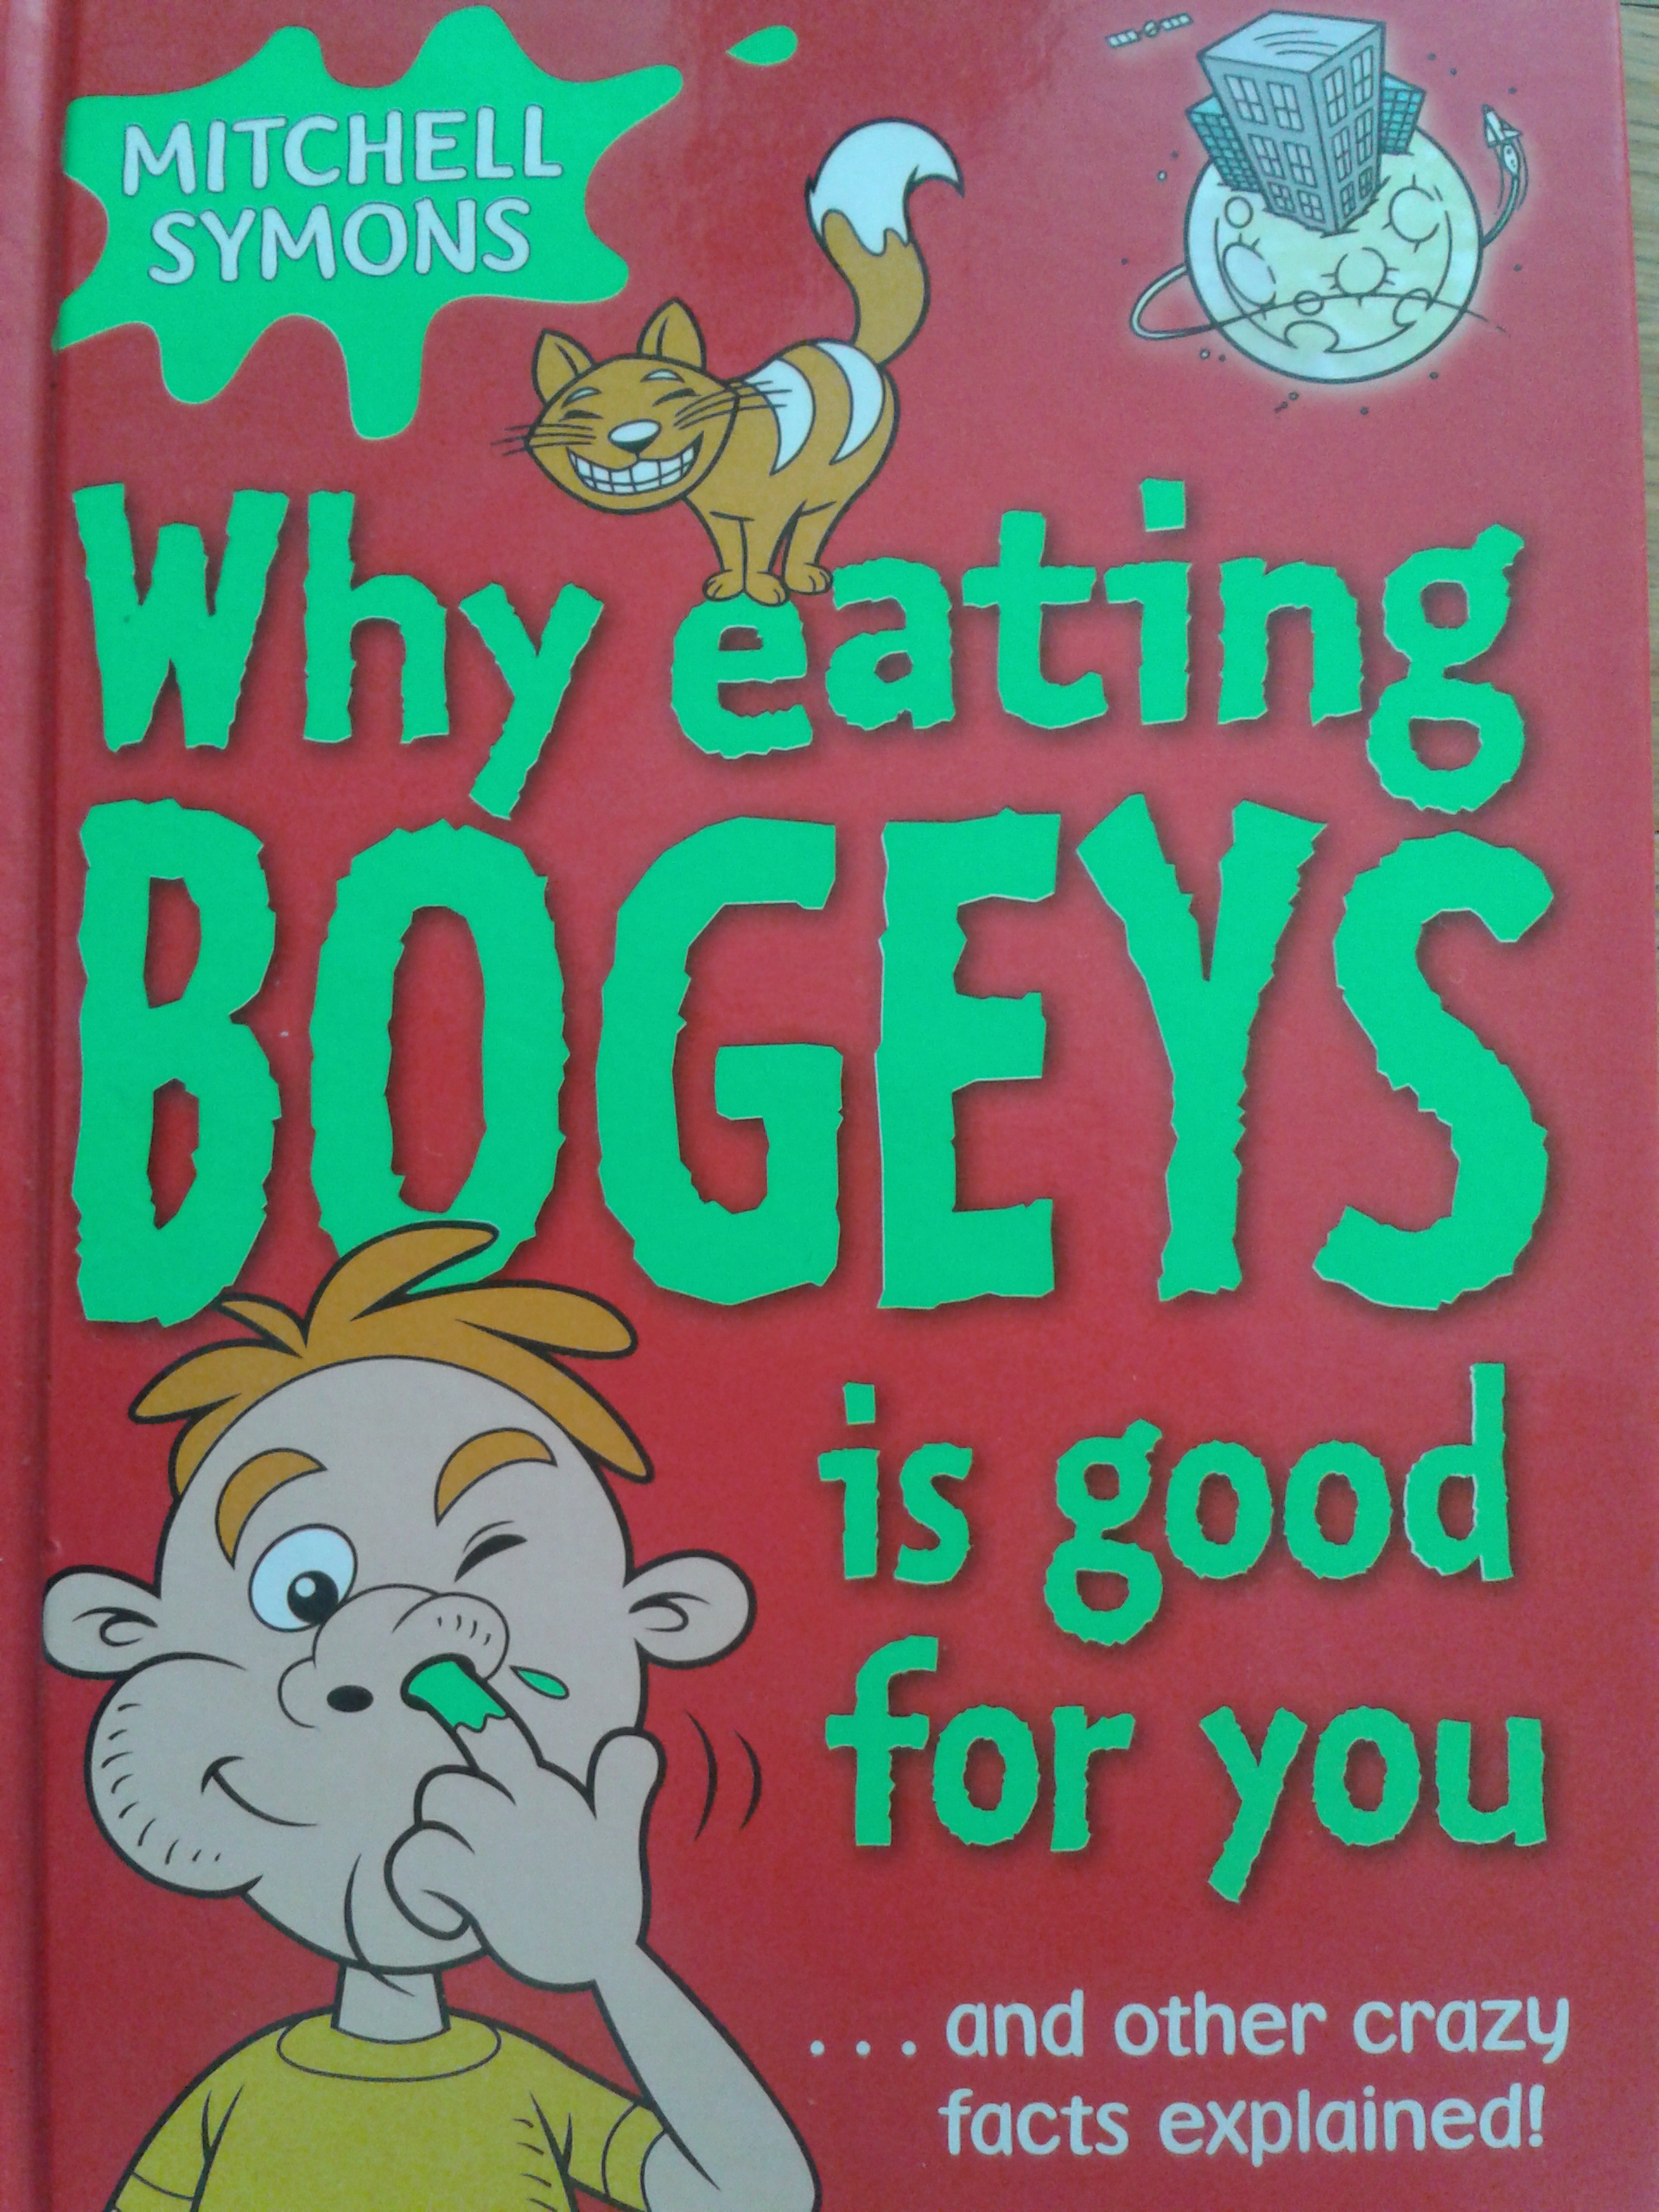 Why Eating Bogeys is Good for You